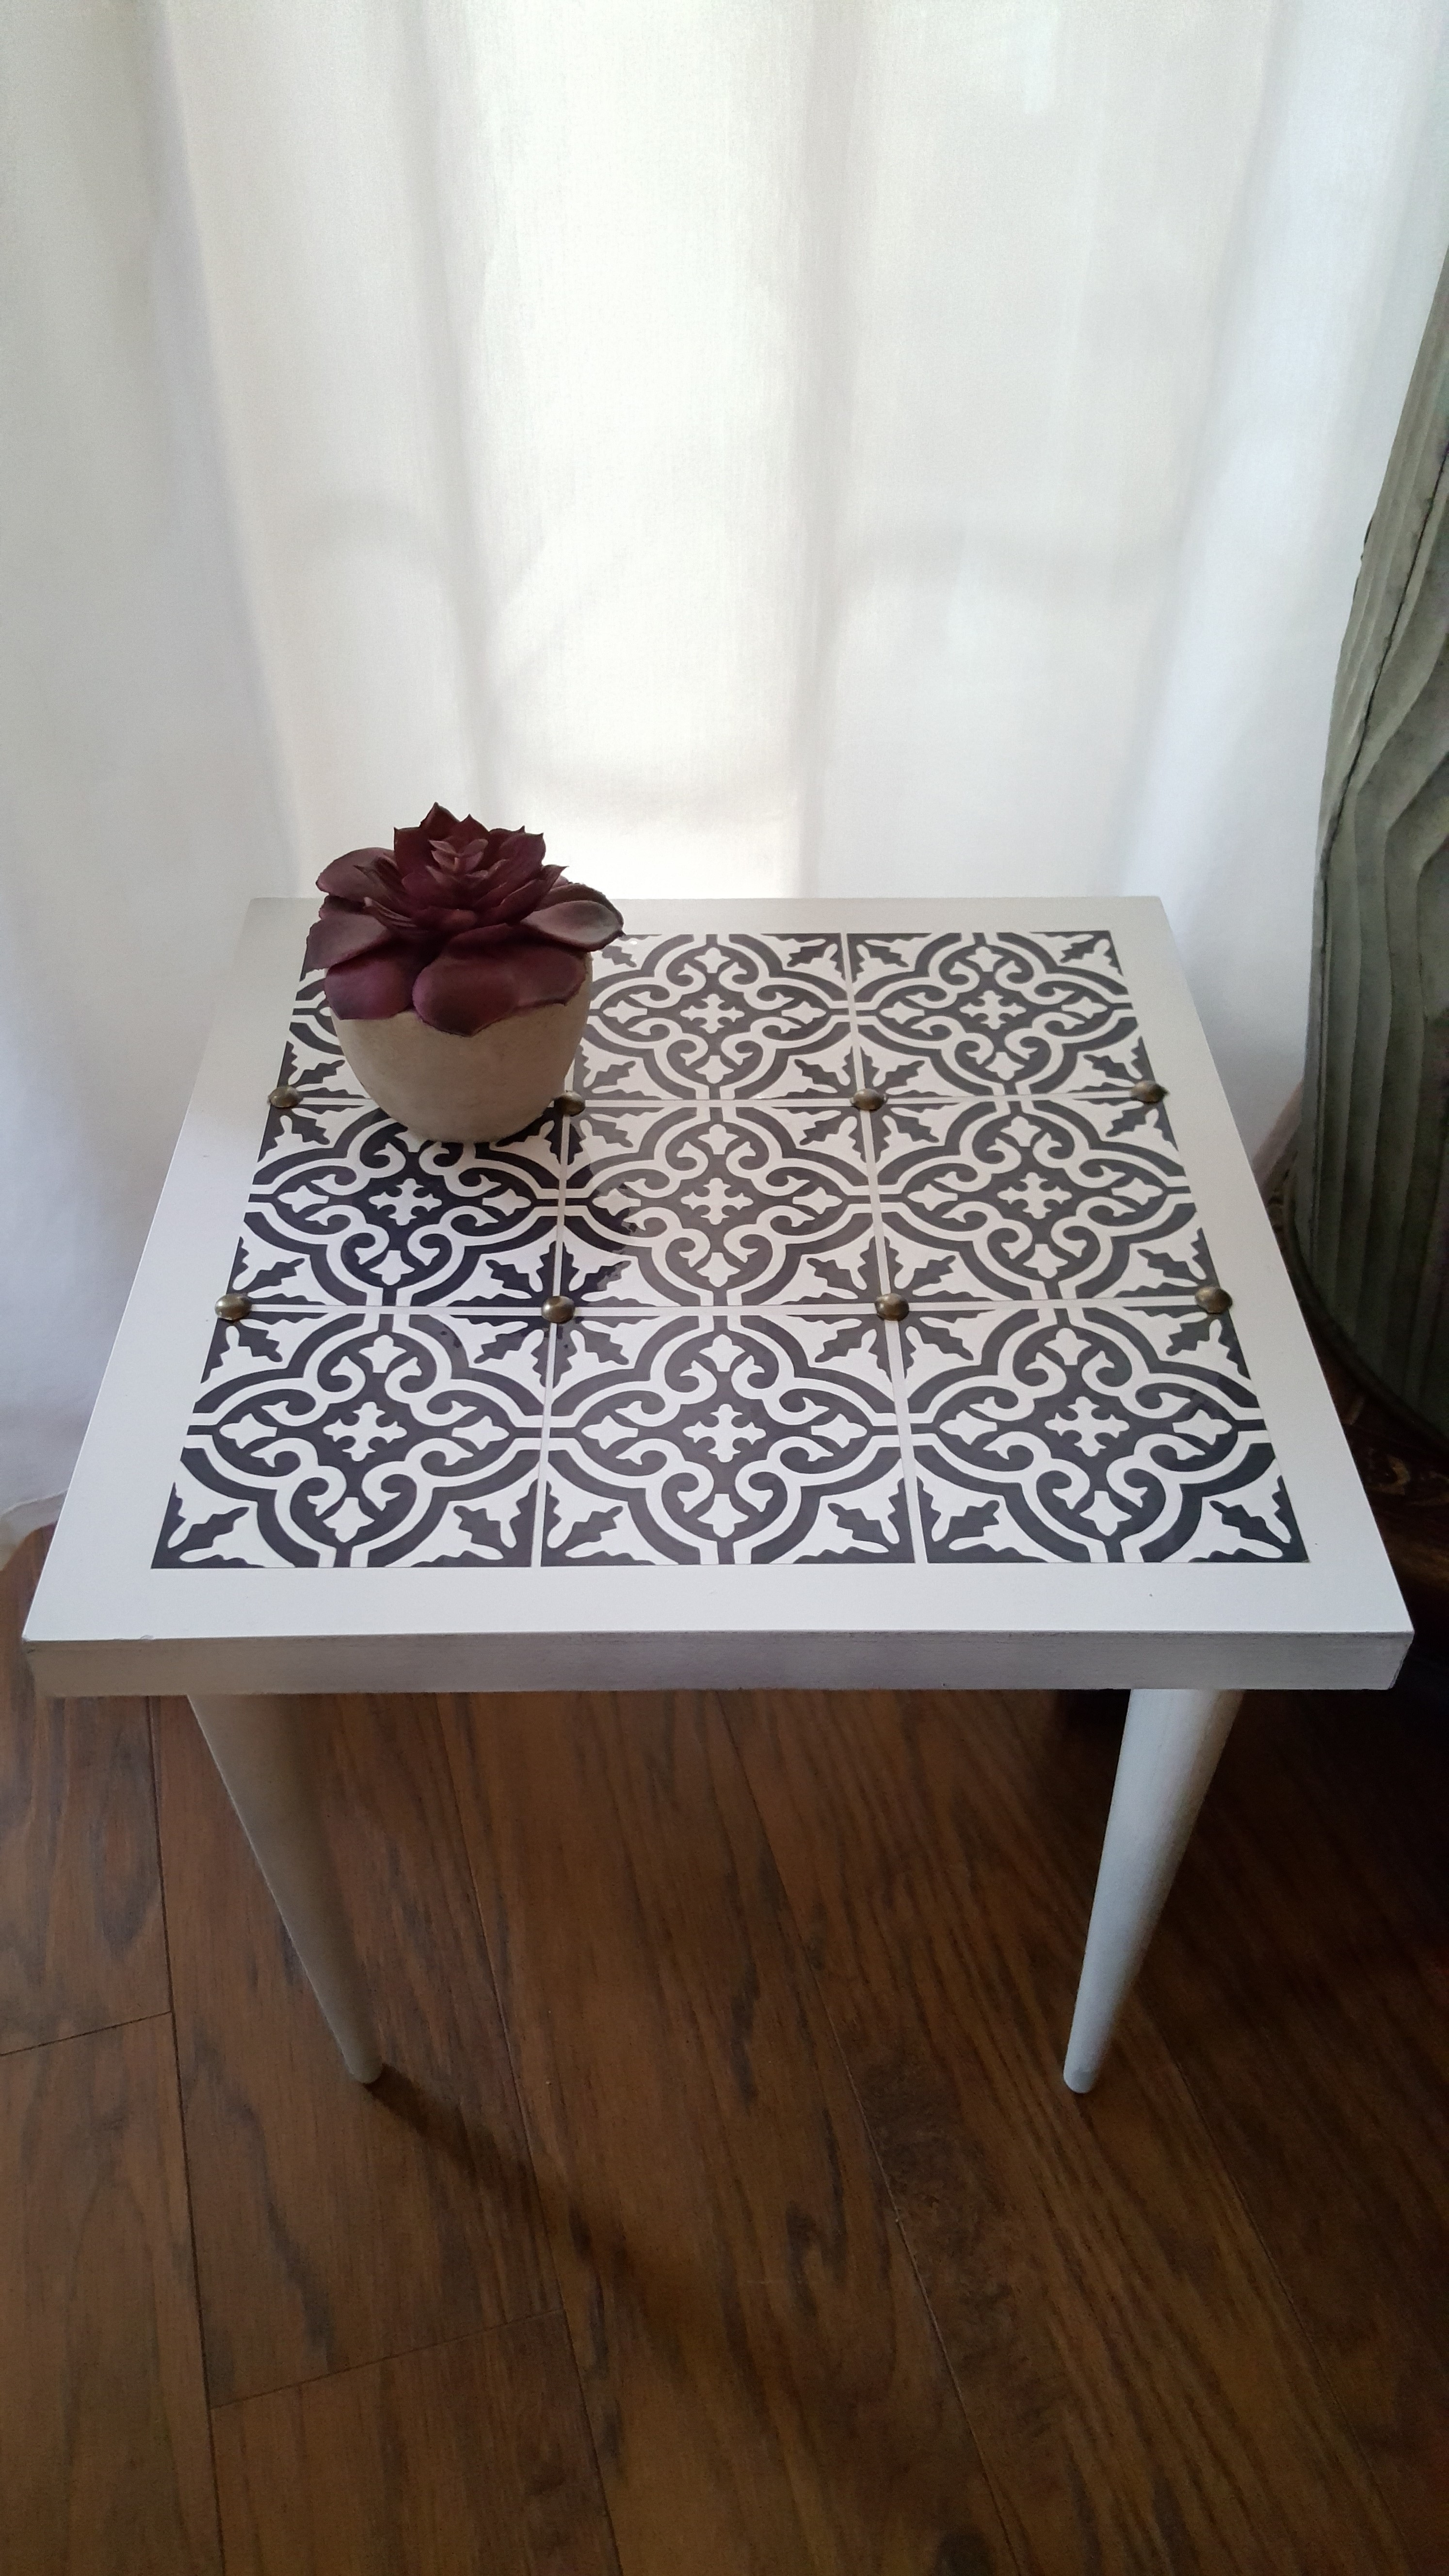 Thrifted & Re-lifted Makeover Challenge, A DIY Tiled Table - BEES 'N BURLAP